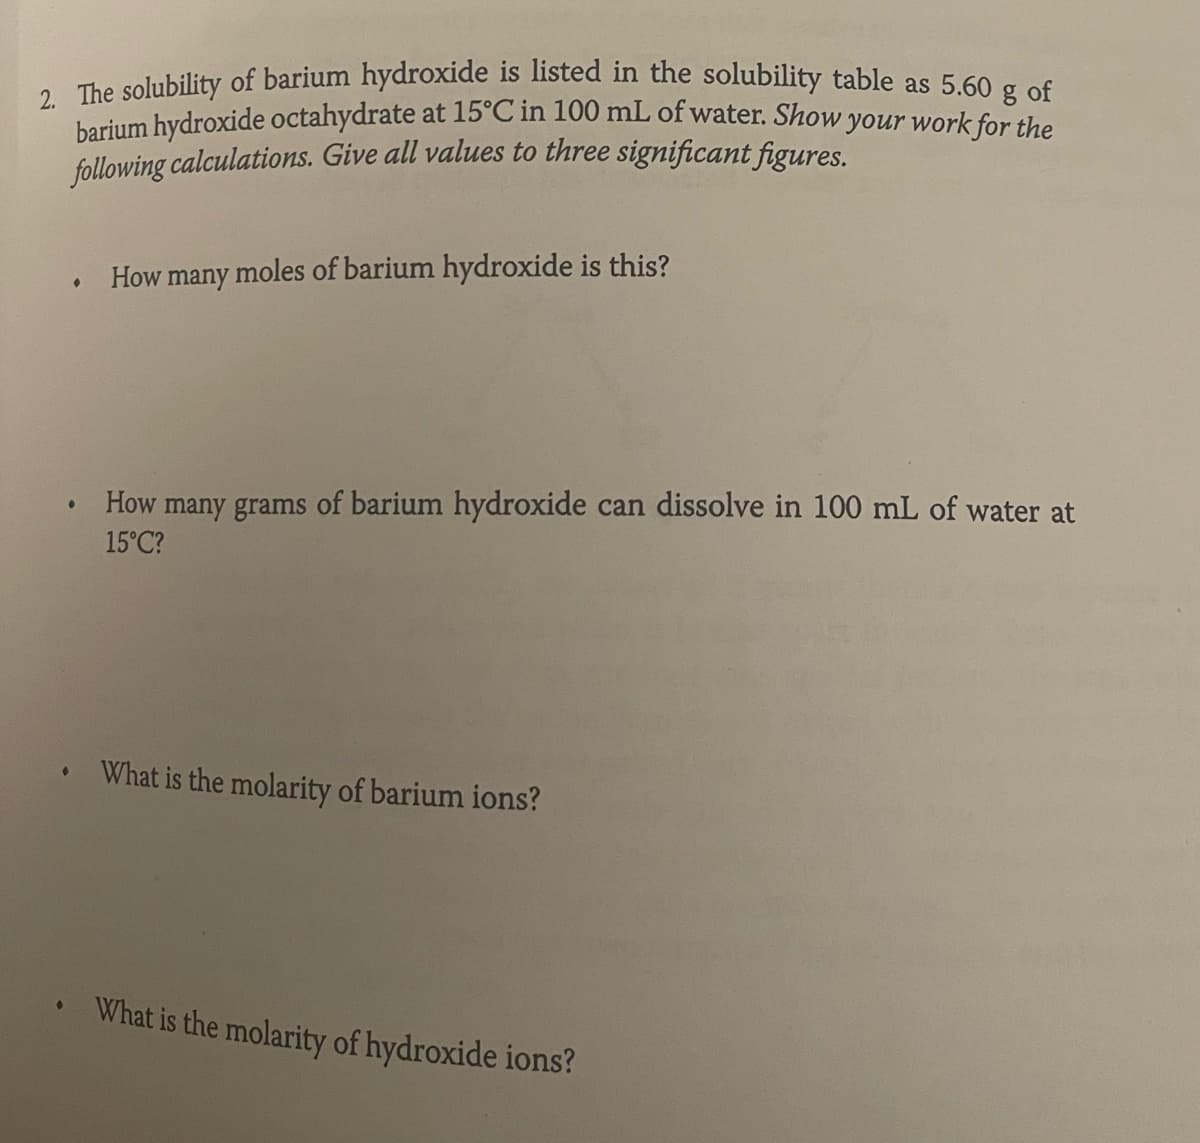 2. The solubility of barium hydroxide is listed in the solubility table as 5.60 g of
barium hydroxide octahydrate at 15°C in 100 mL of water. Show your work for the
following calculations. Give all values to three significant figures.
●
●
How many moles of barium hydroxide is this?
• How many grams of barium hydroxide can dissolve in 100 mL of water at
15°C?
• What is the molarity of barium ions?
What is the molarity of hydroxide ions?